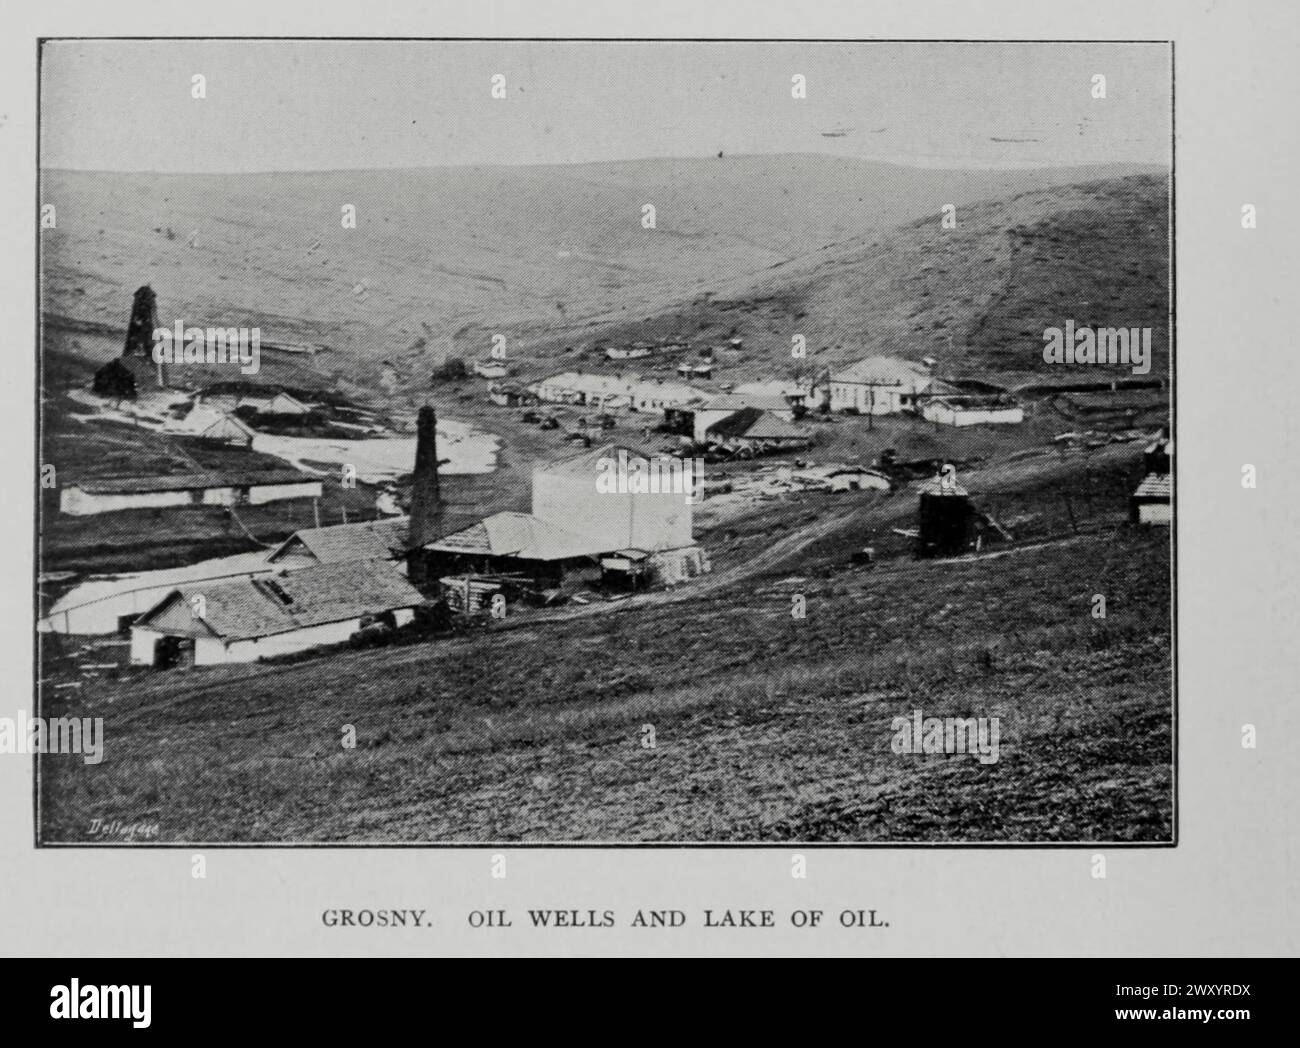 GROSNY. OIL WELLS AND LAKE OF OIL. from the Article THE BAKU PETROLEUM DISTRICT OF RUSSIA. By David A. Louis. from The Engineering Magazine Devoted to Industrial Progress Volume XV 1898 The Engineering Magazine Co Stock Photo